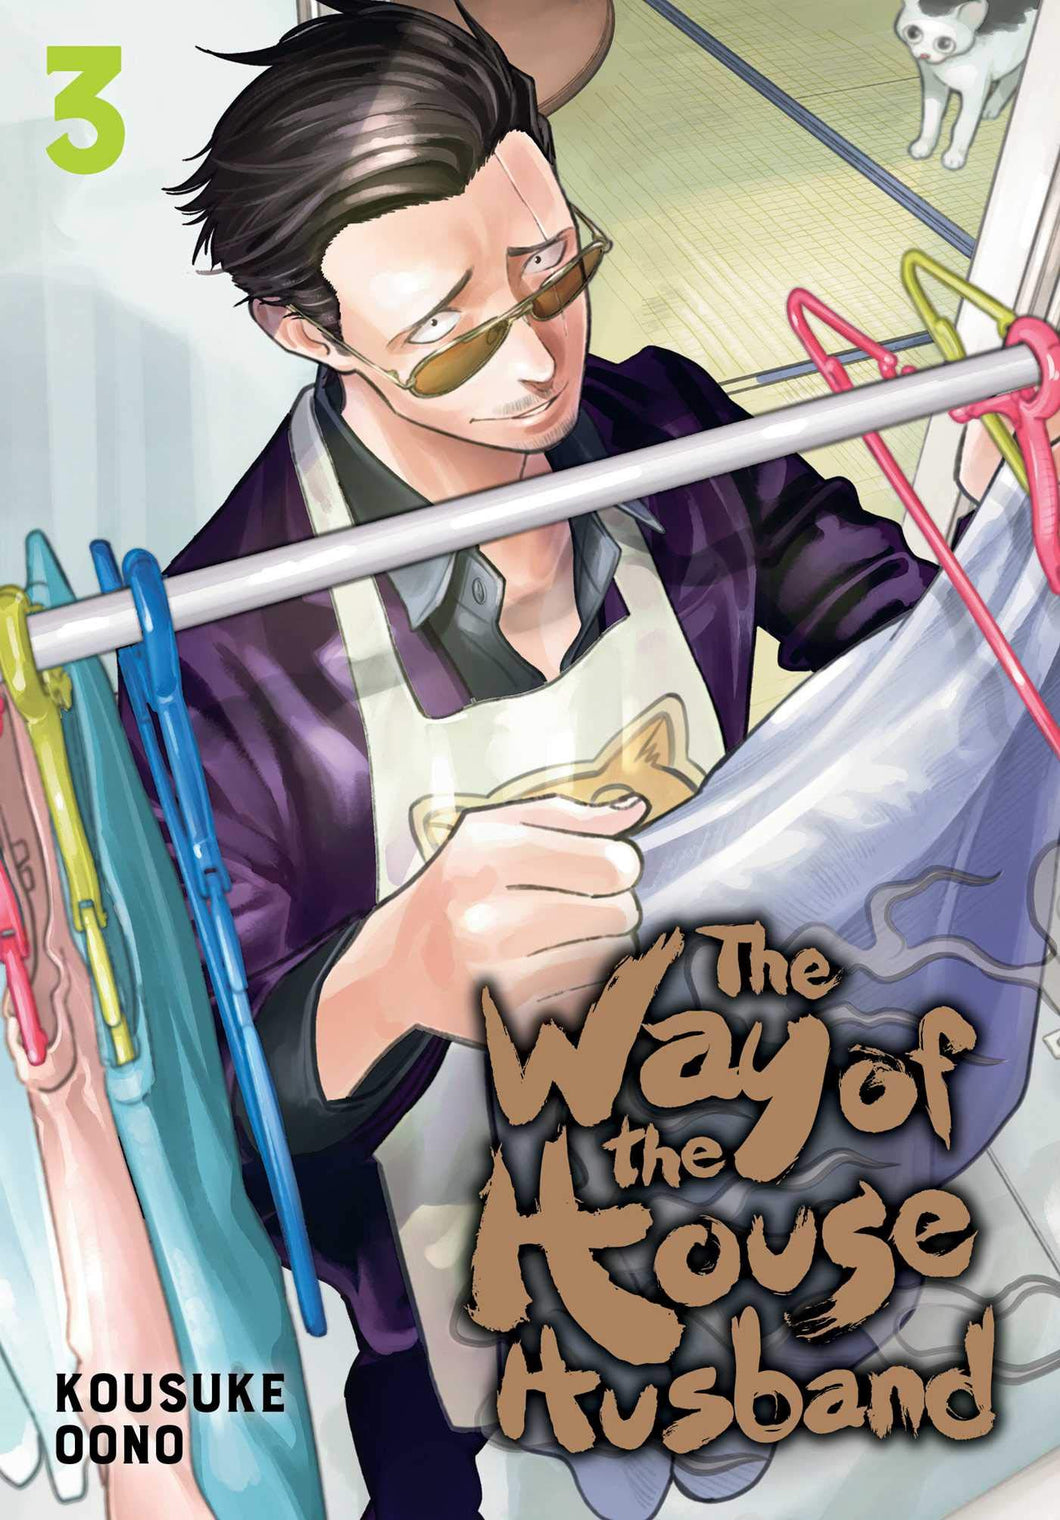 The Way Of The House Husband Volume 3